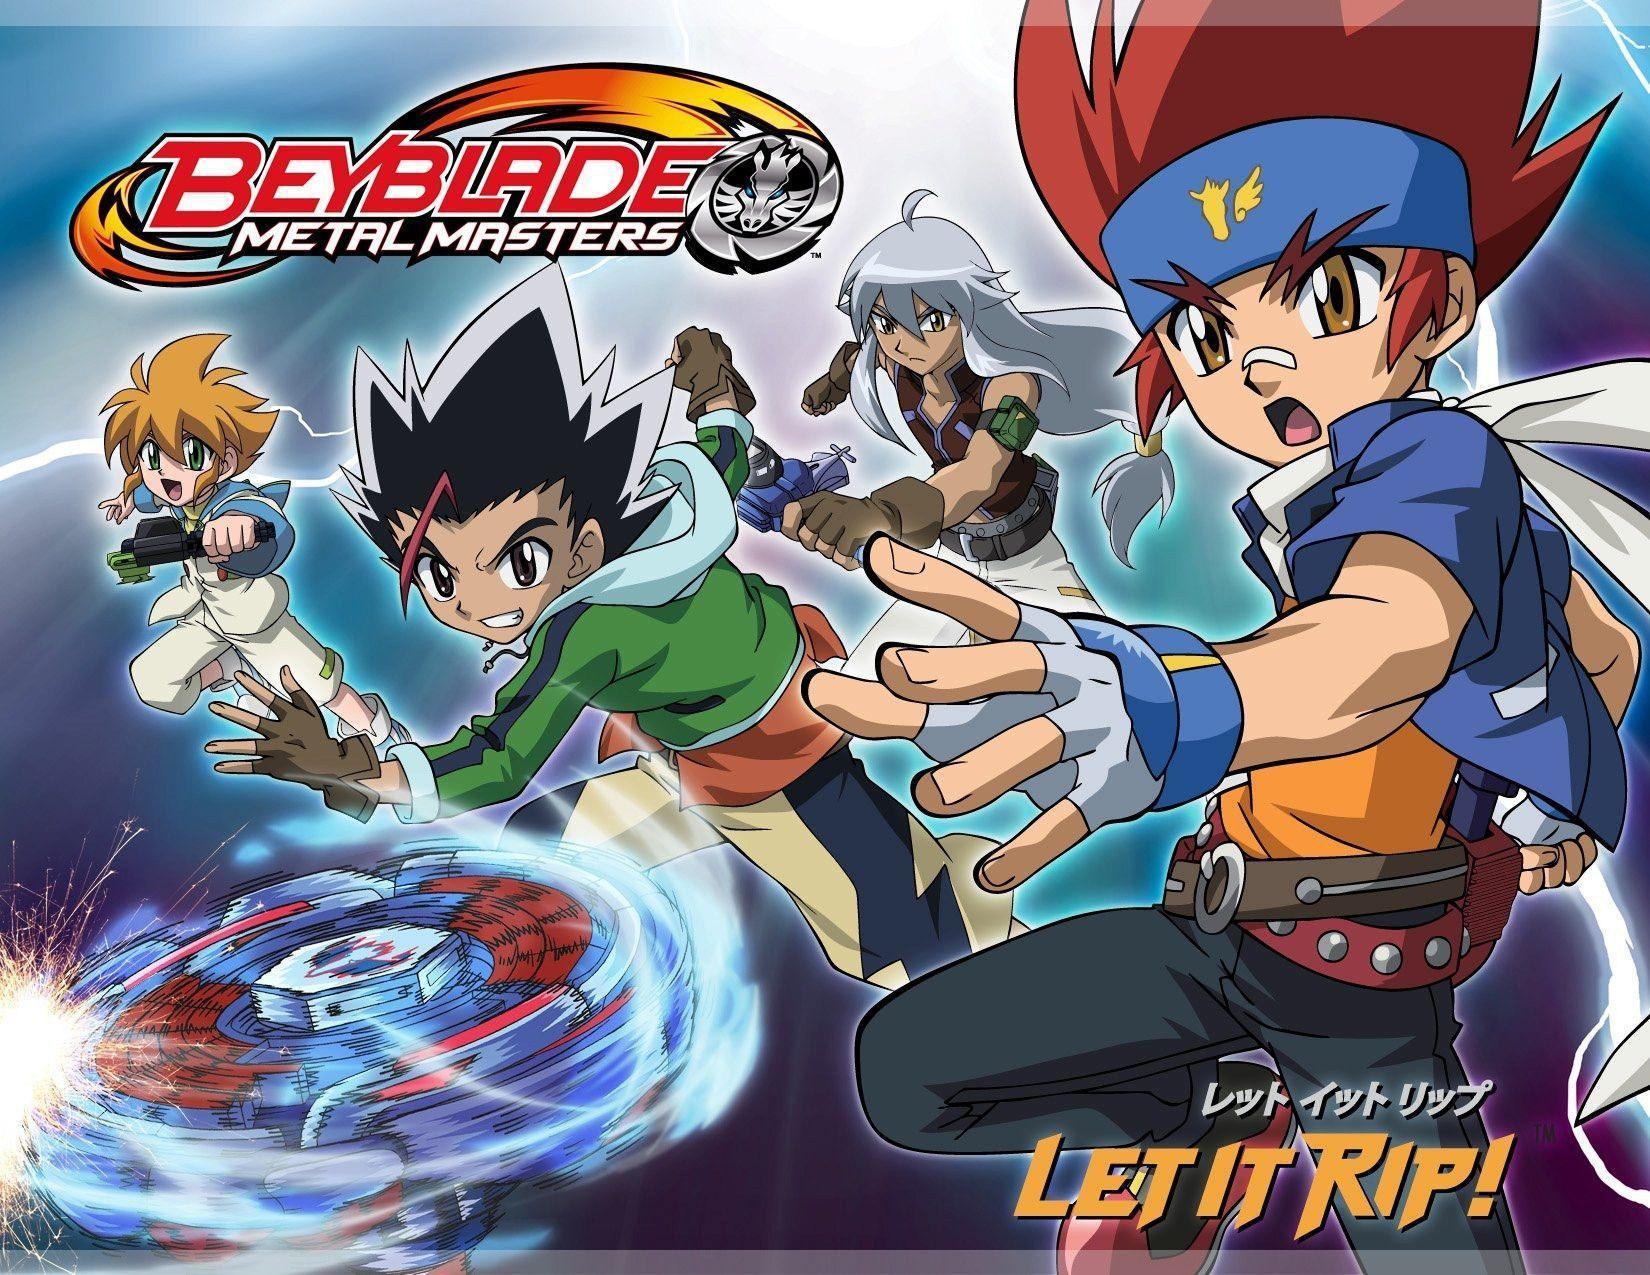 beyblade metal fusion sd movies point free download